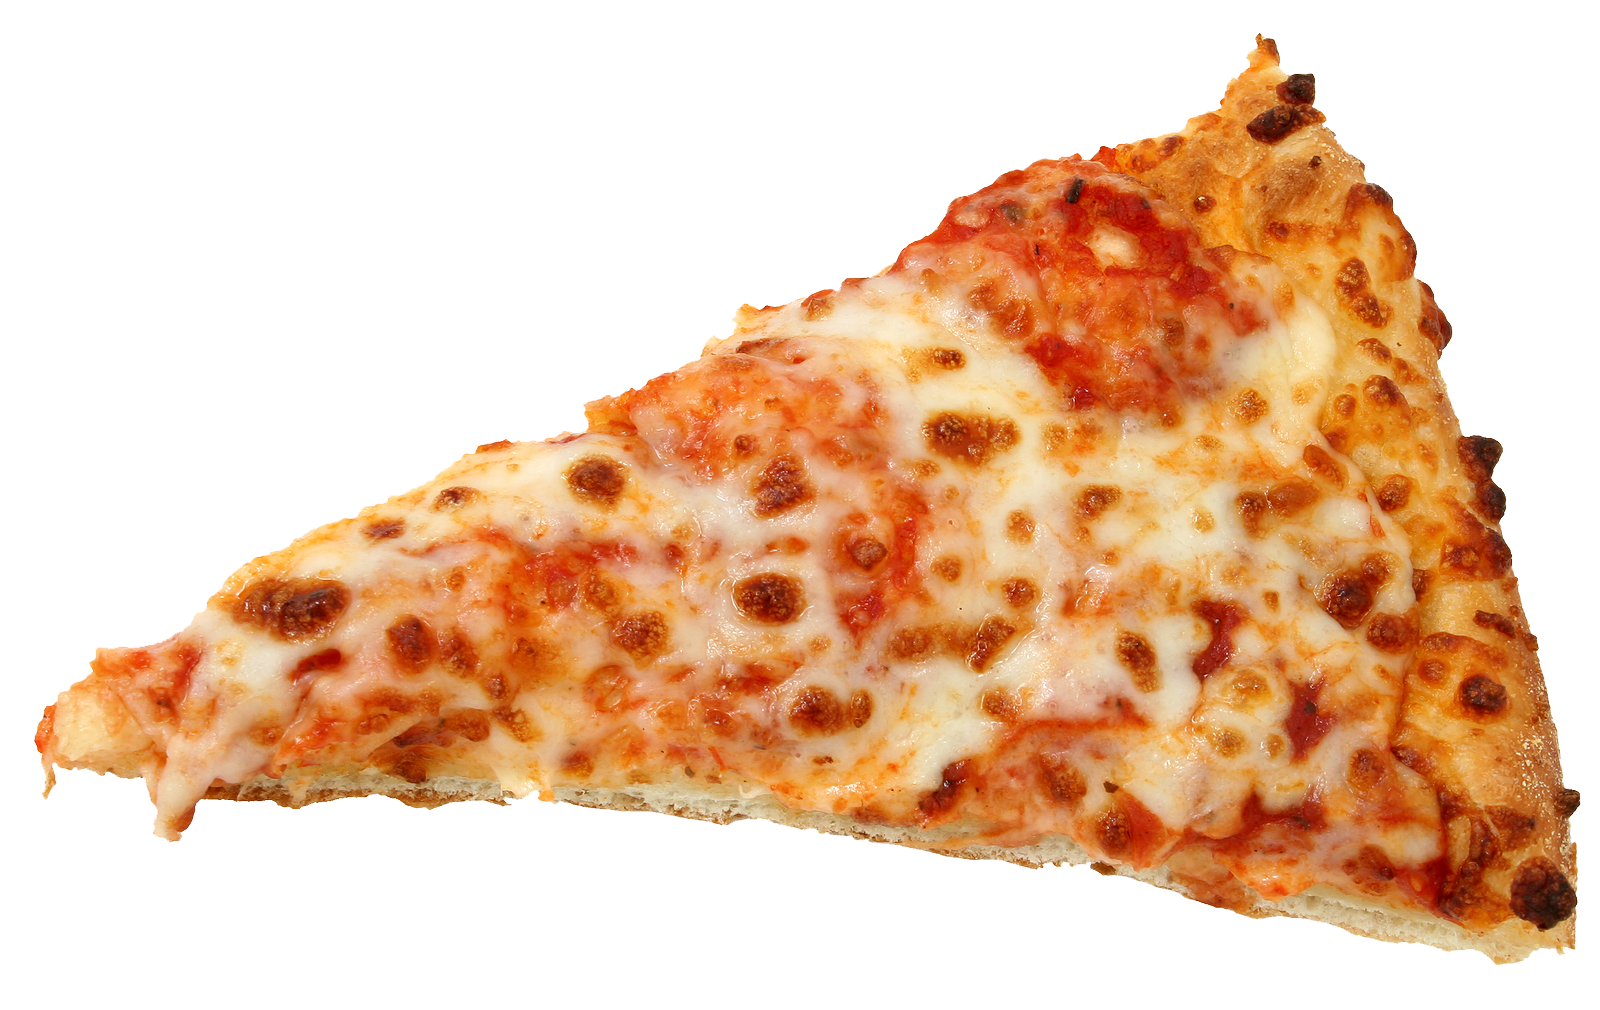 Download pizza slice hq. Yearbook clipart say cheese